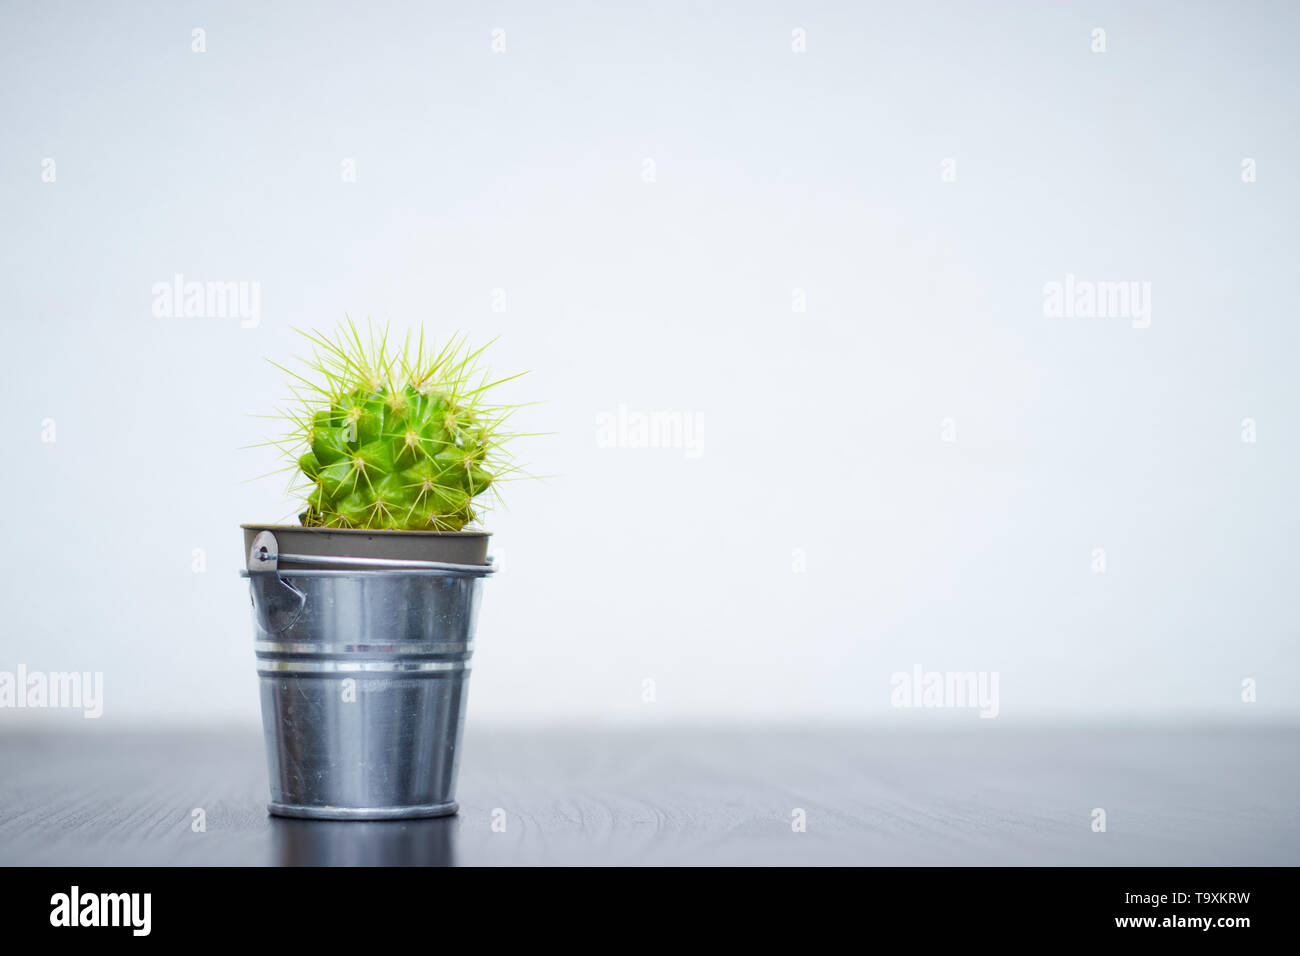 Small plant in a pot of succulents or cacti on a white background, front view. Copy space. Stock Photo